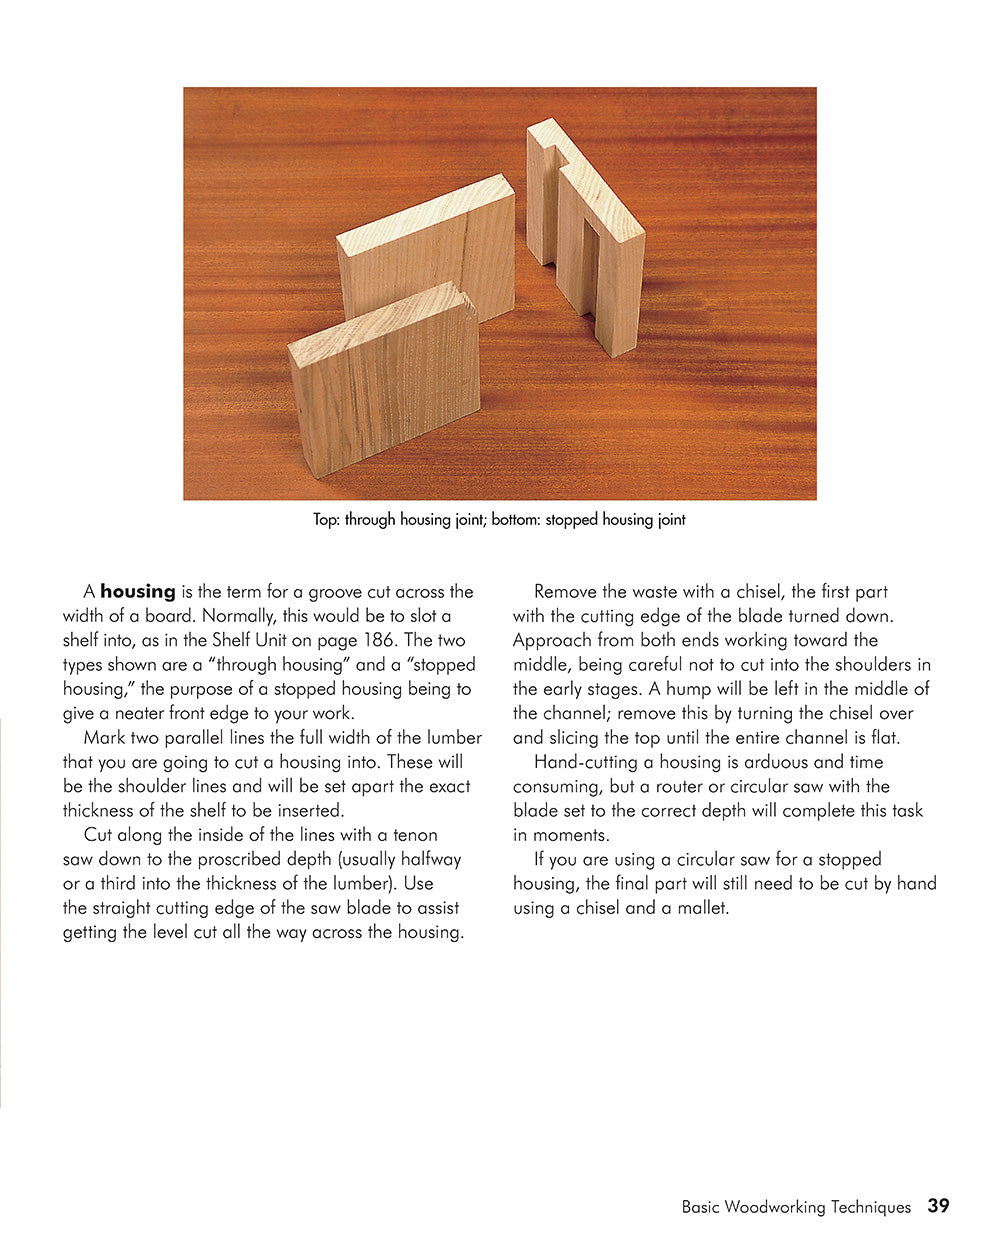 Practical Weekend Projects for Woodworkers